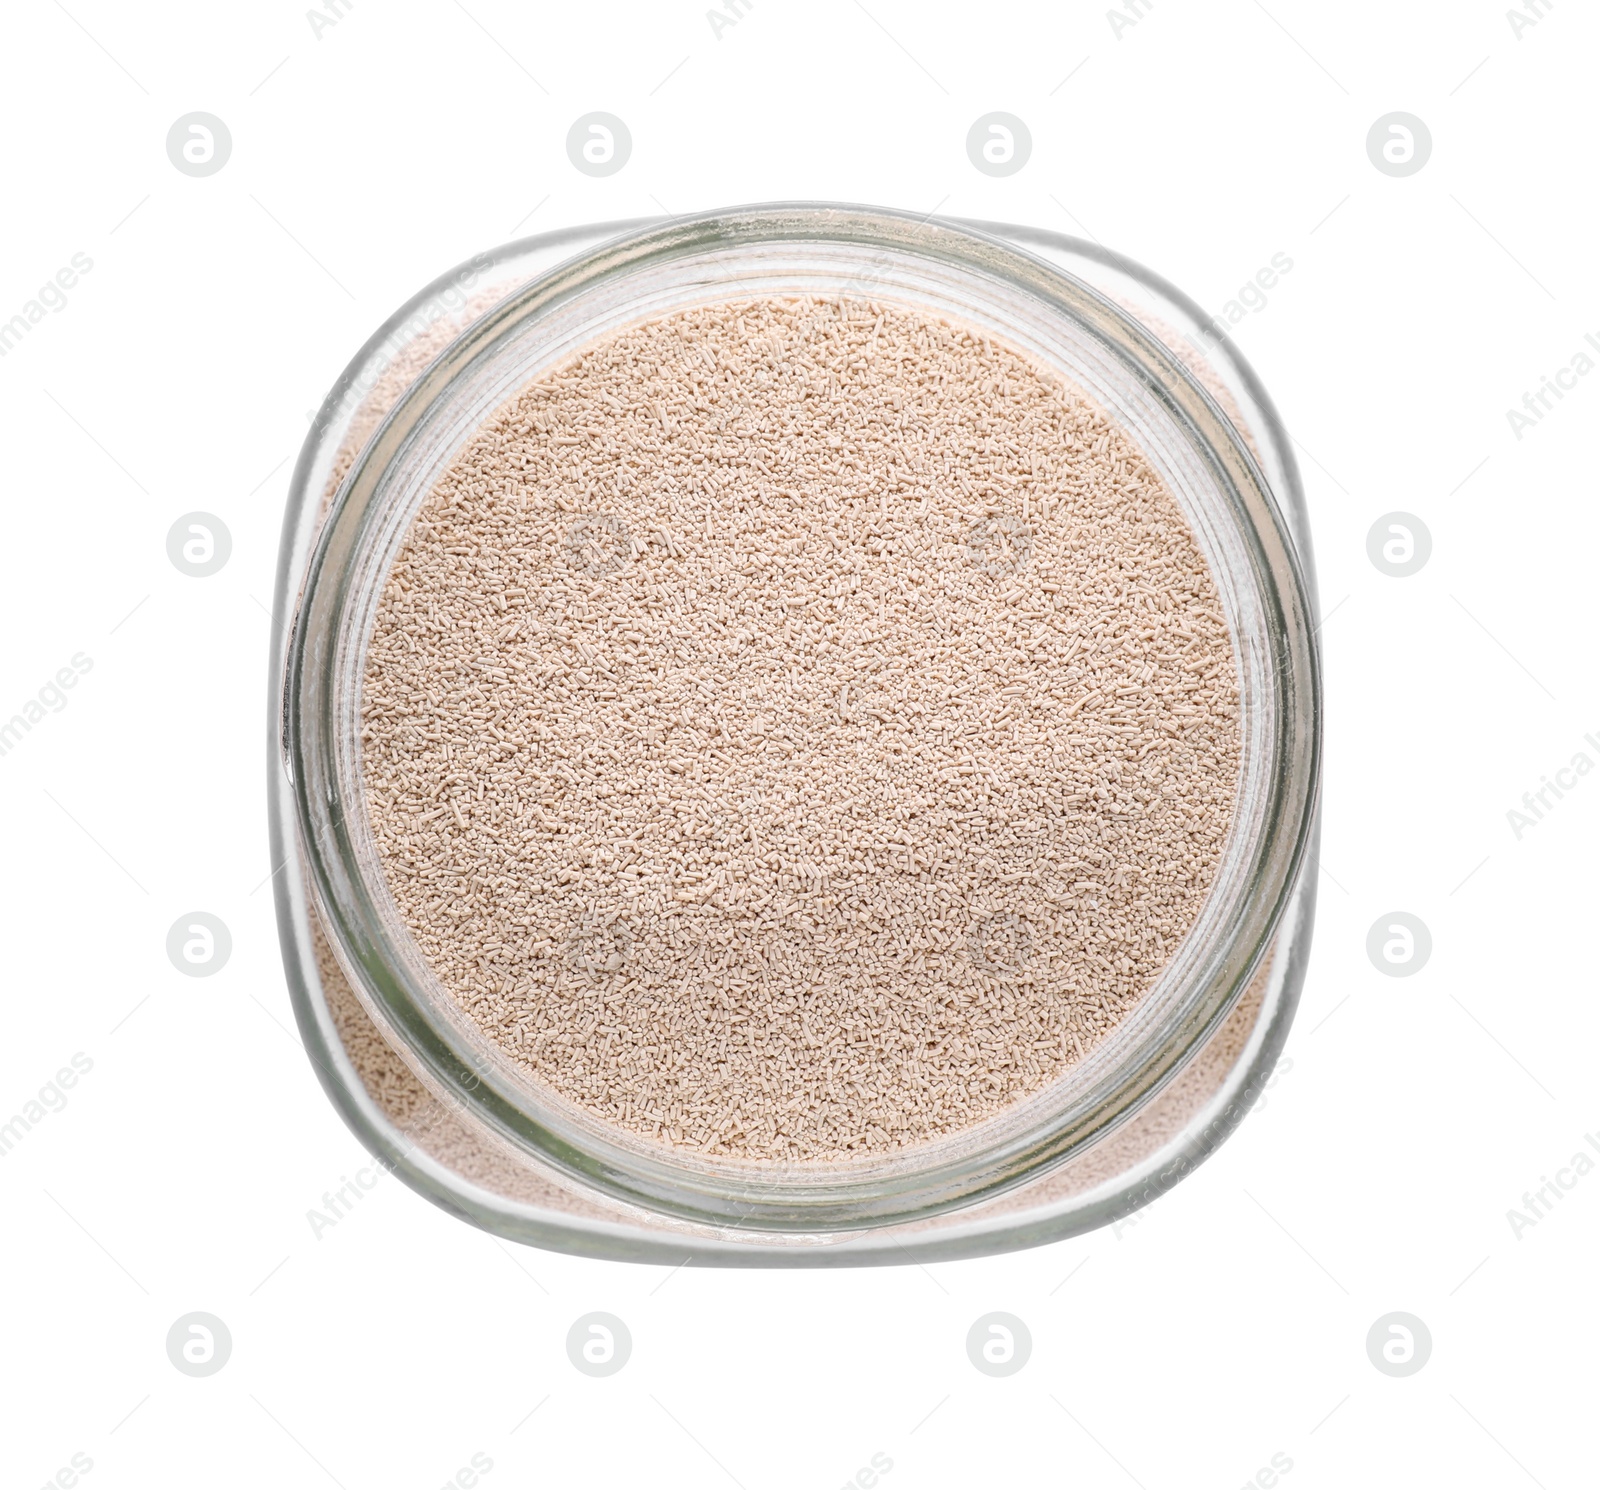 Photo of Jar with active dry yeast isolated on white, top view